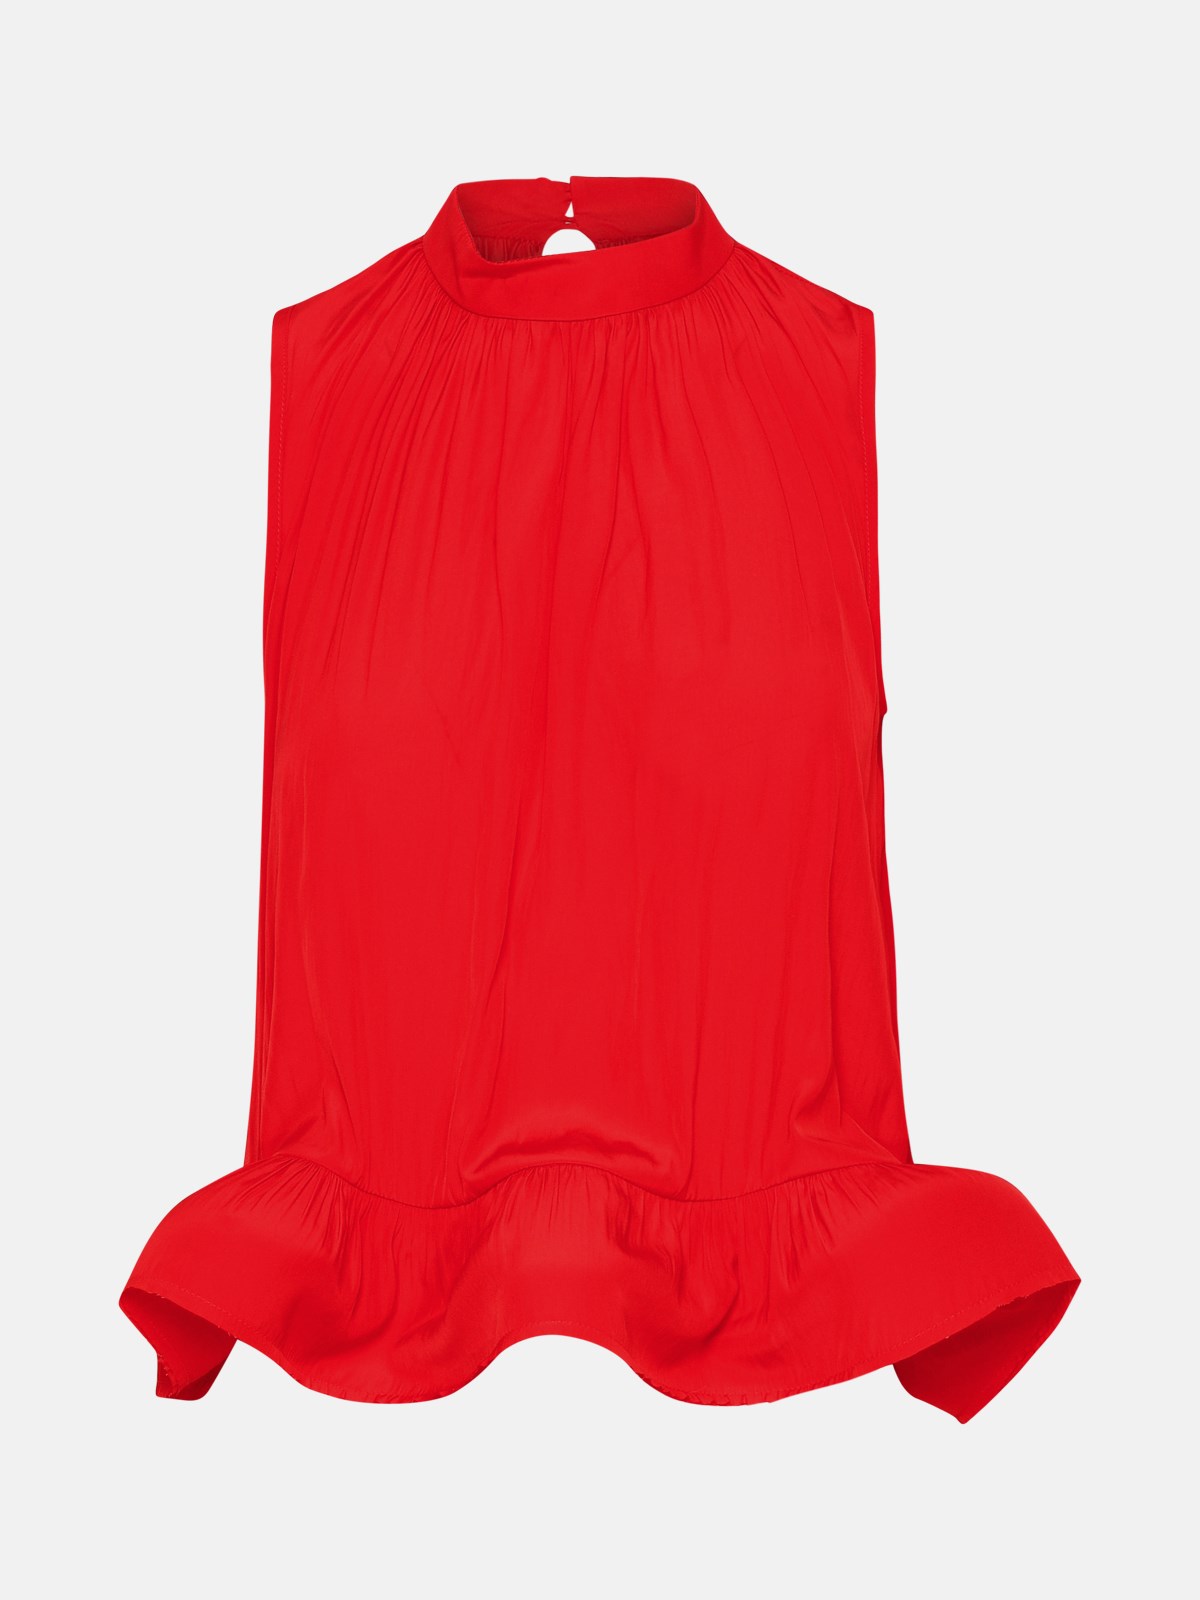 Lanvin Red Polyester Top